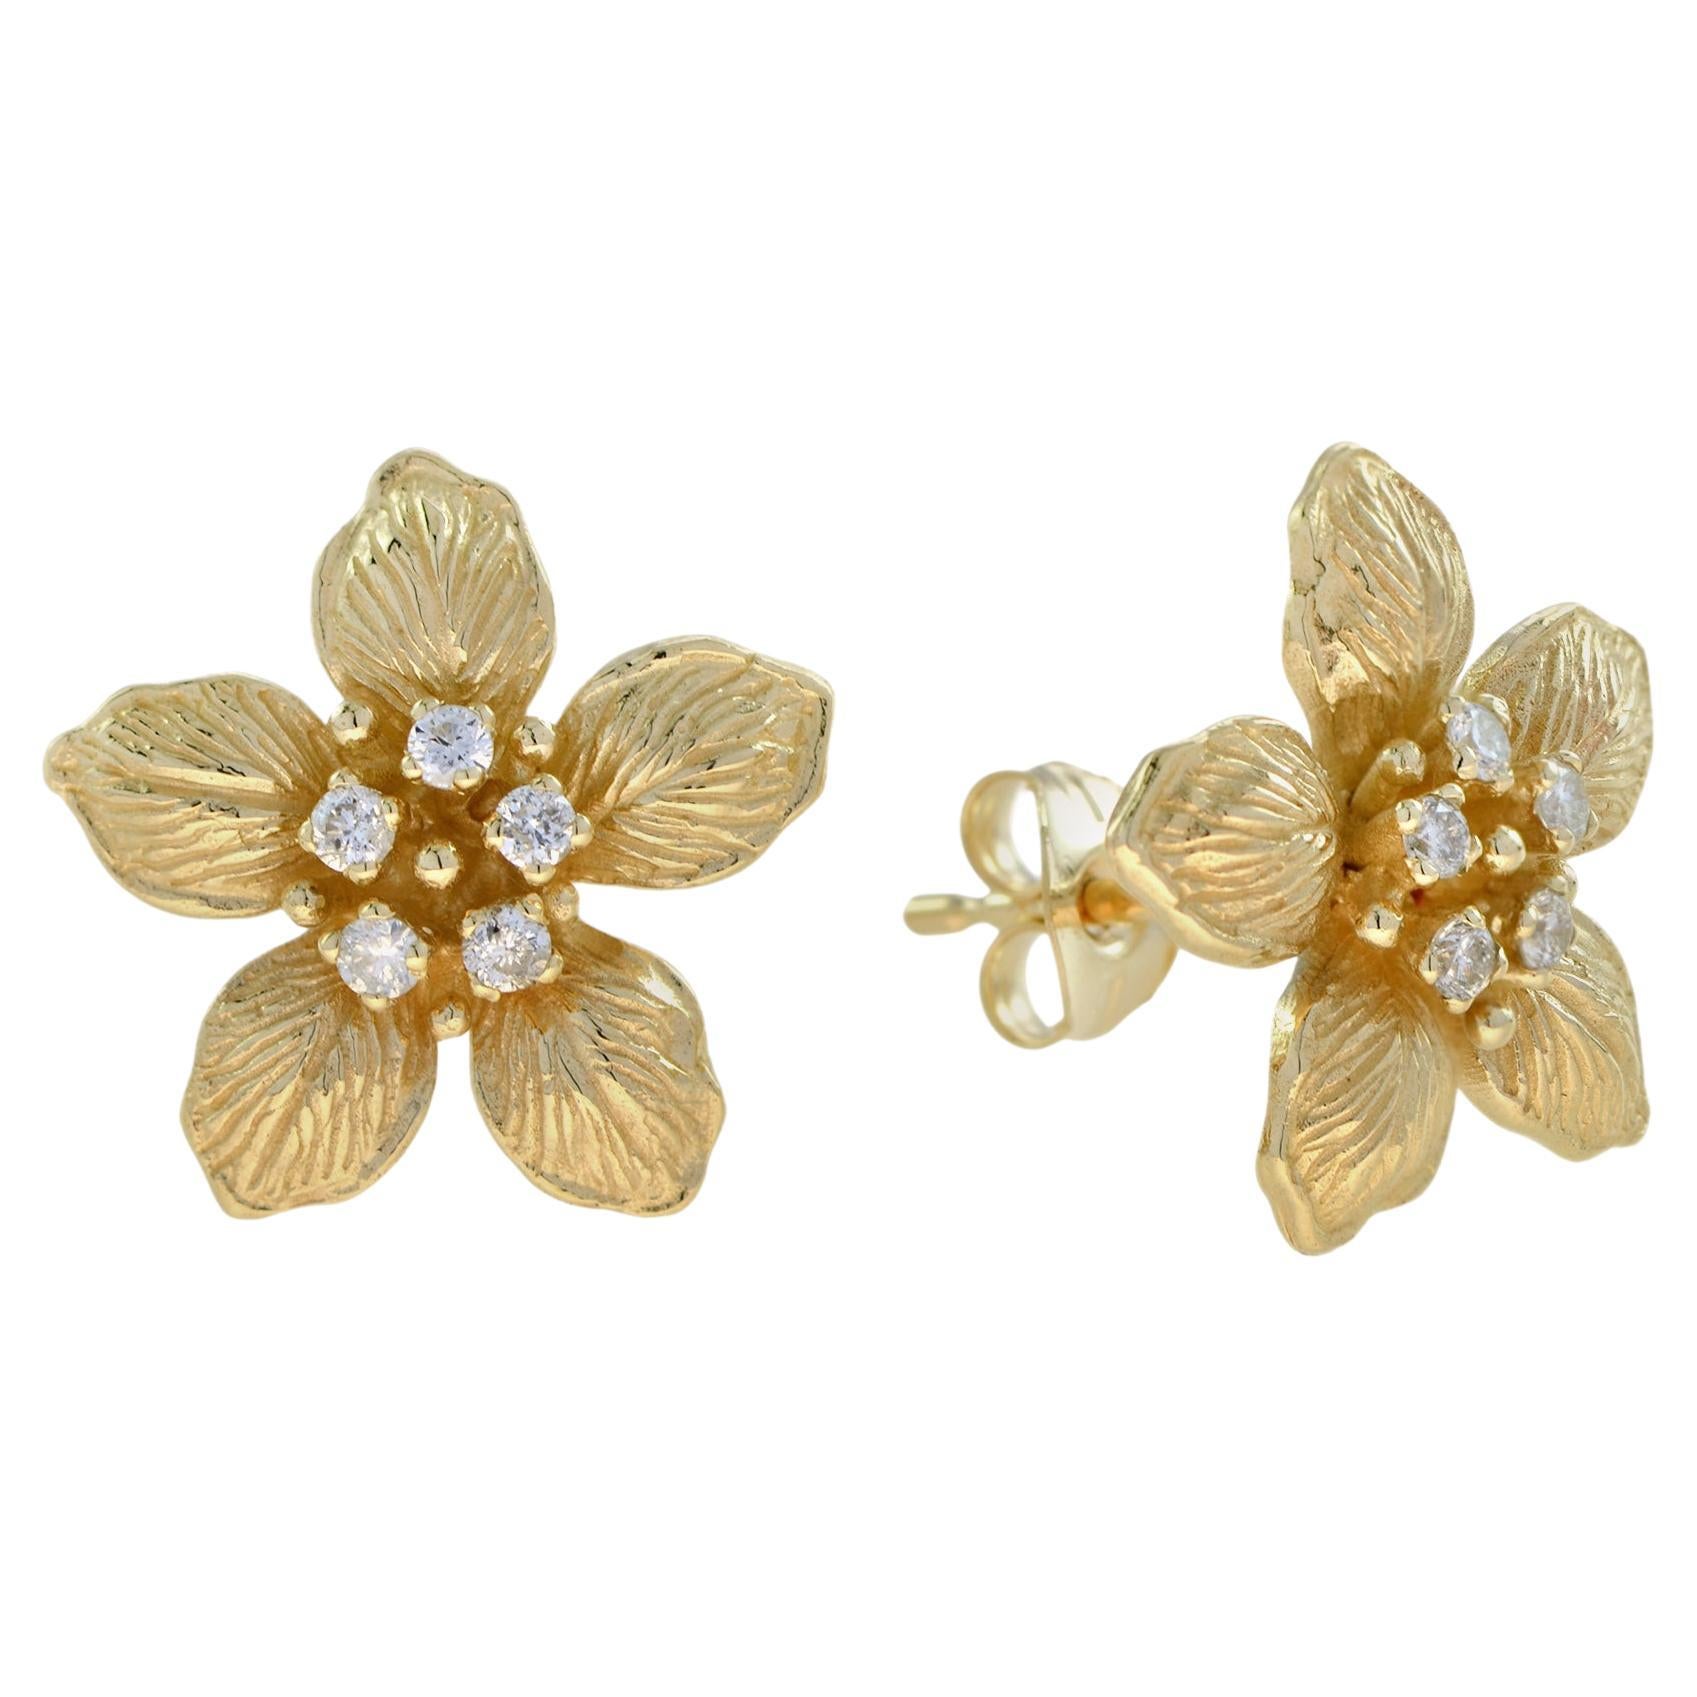 Diamond Vintage Style Floral Stud Earrings in 9k Yellow Gold